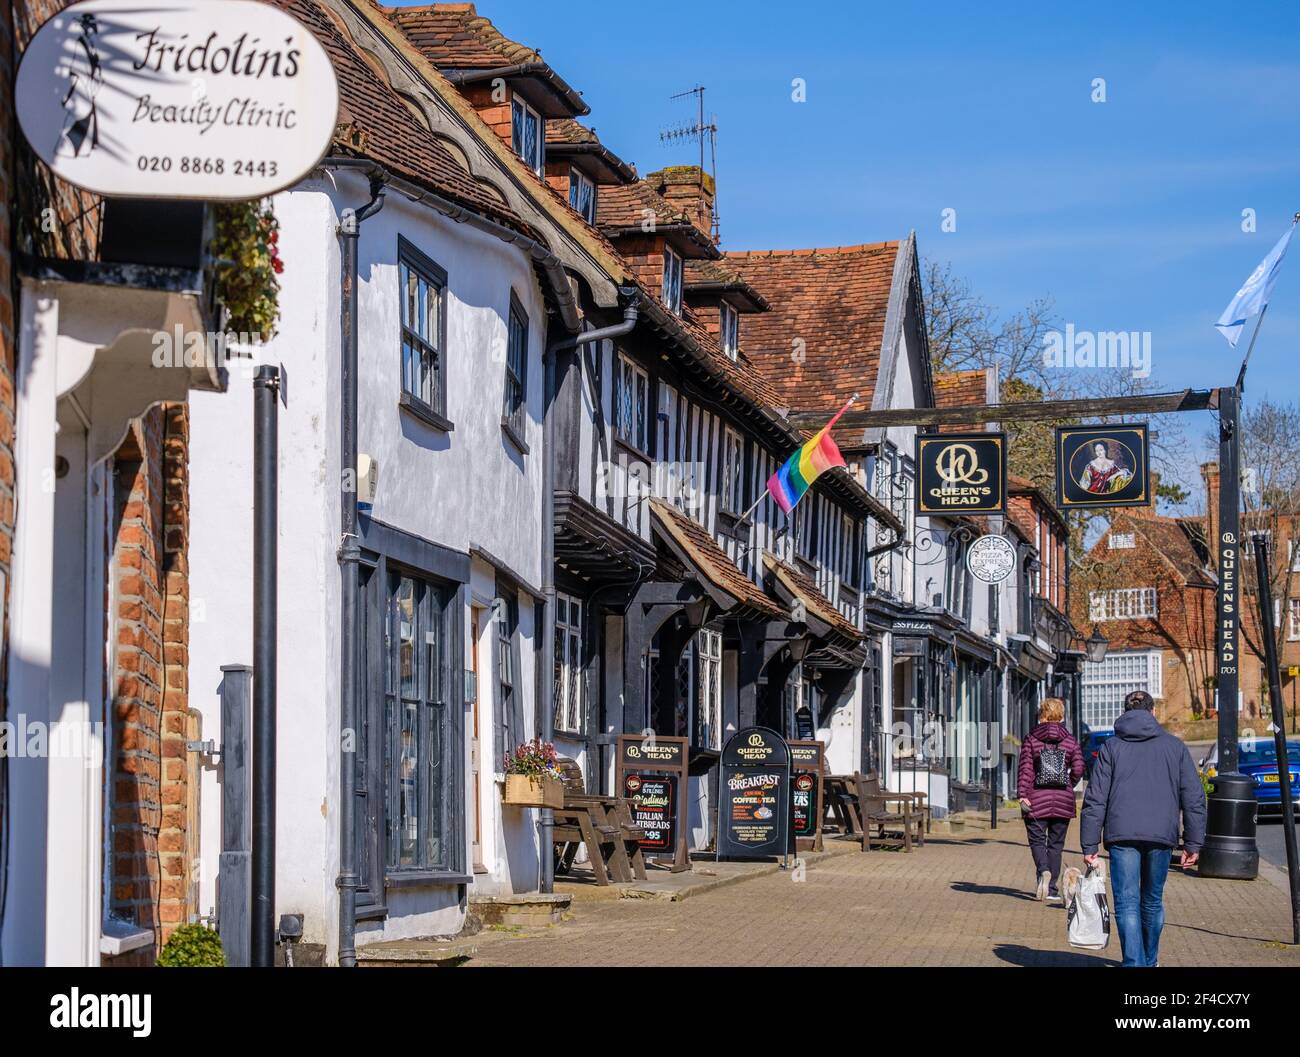 Pinner Village High Street. Historic Queen’s Head Pub, Fridolin’s Beauty Clinic, Pizza Express Old village bakery building. People walking on street. Stock Photo